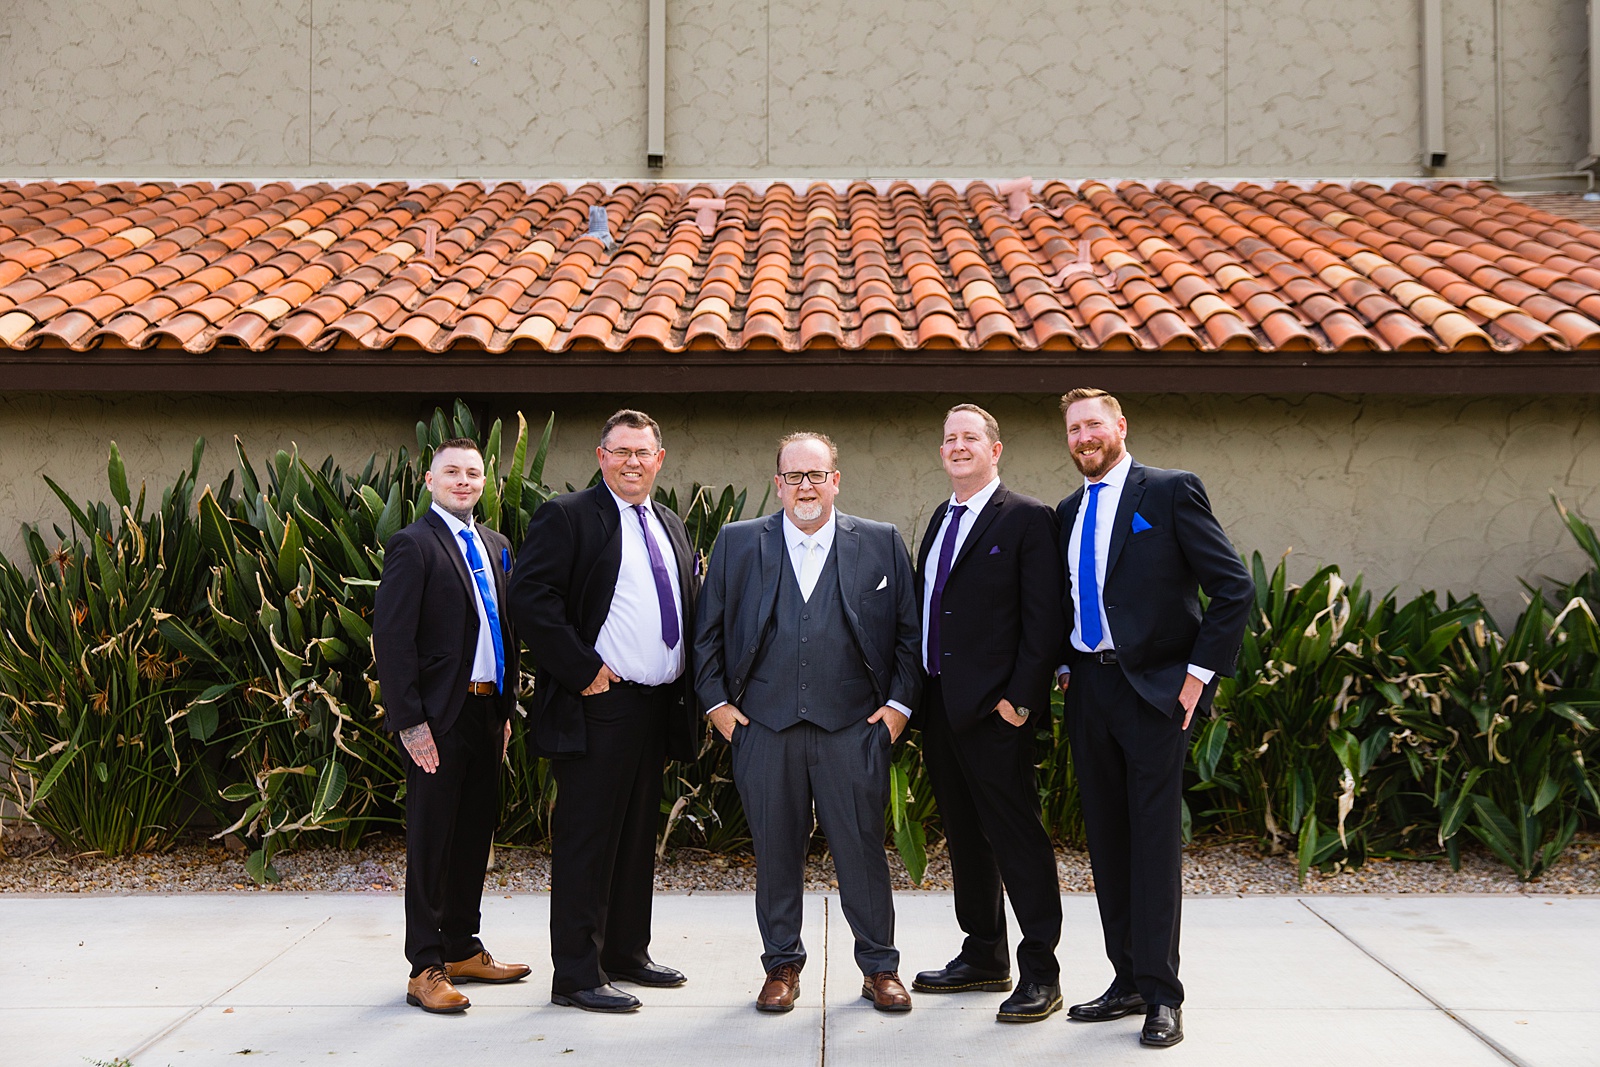 Groom and groomsmen together at a Sun Valley Church wedding by Arizona wedding photographer PMA Photography.